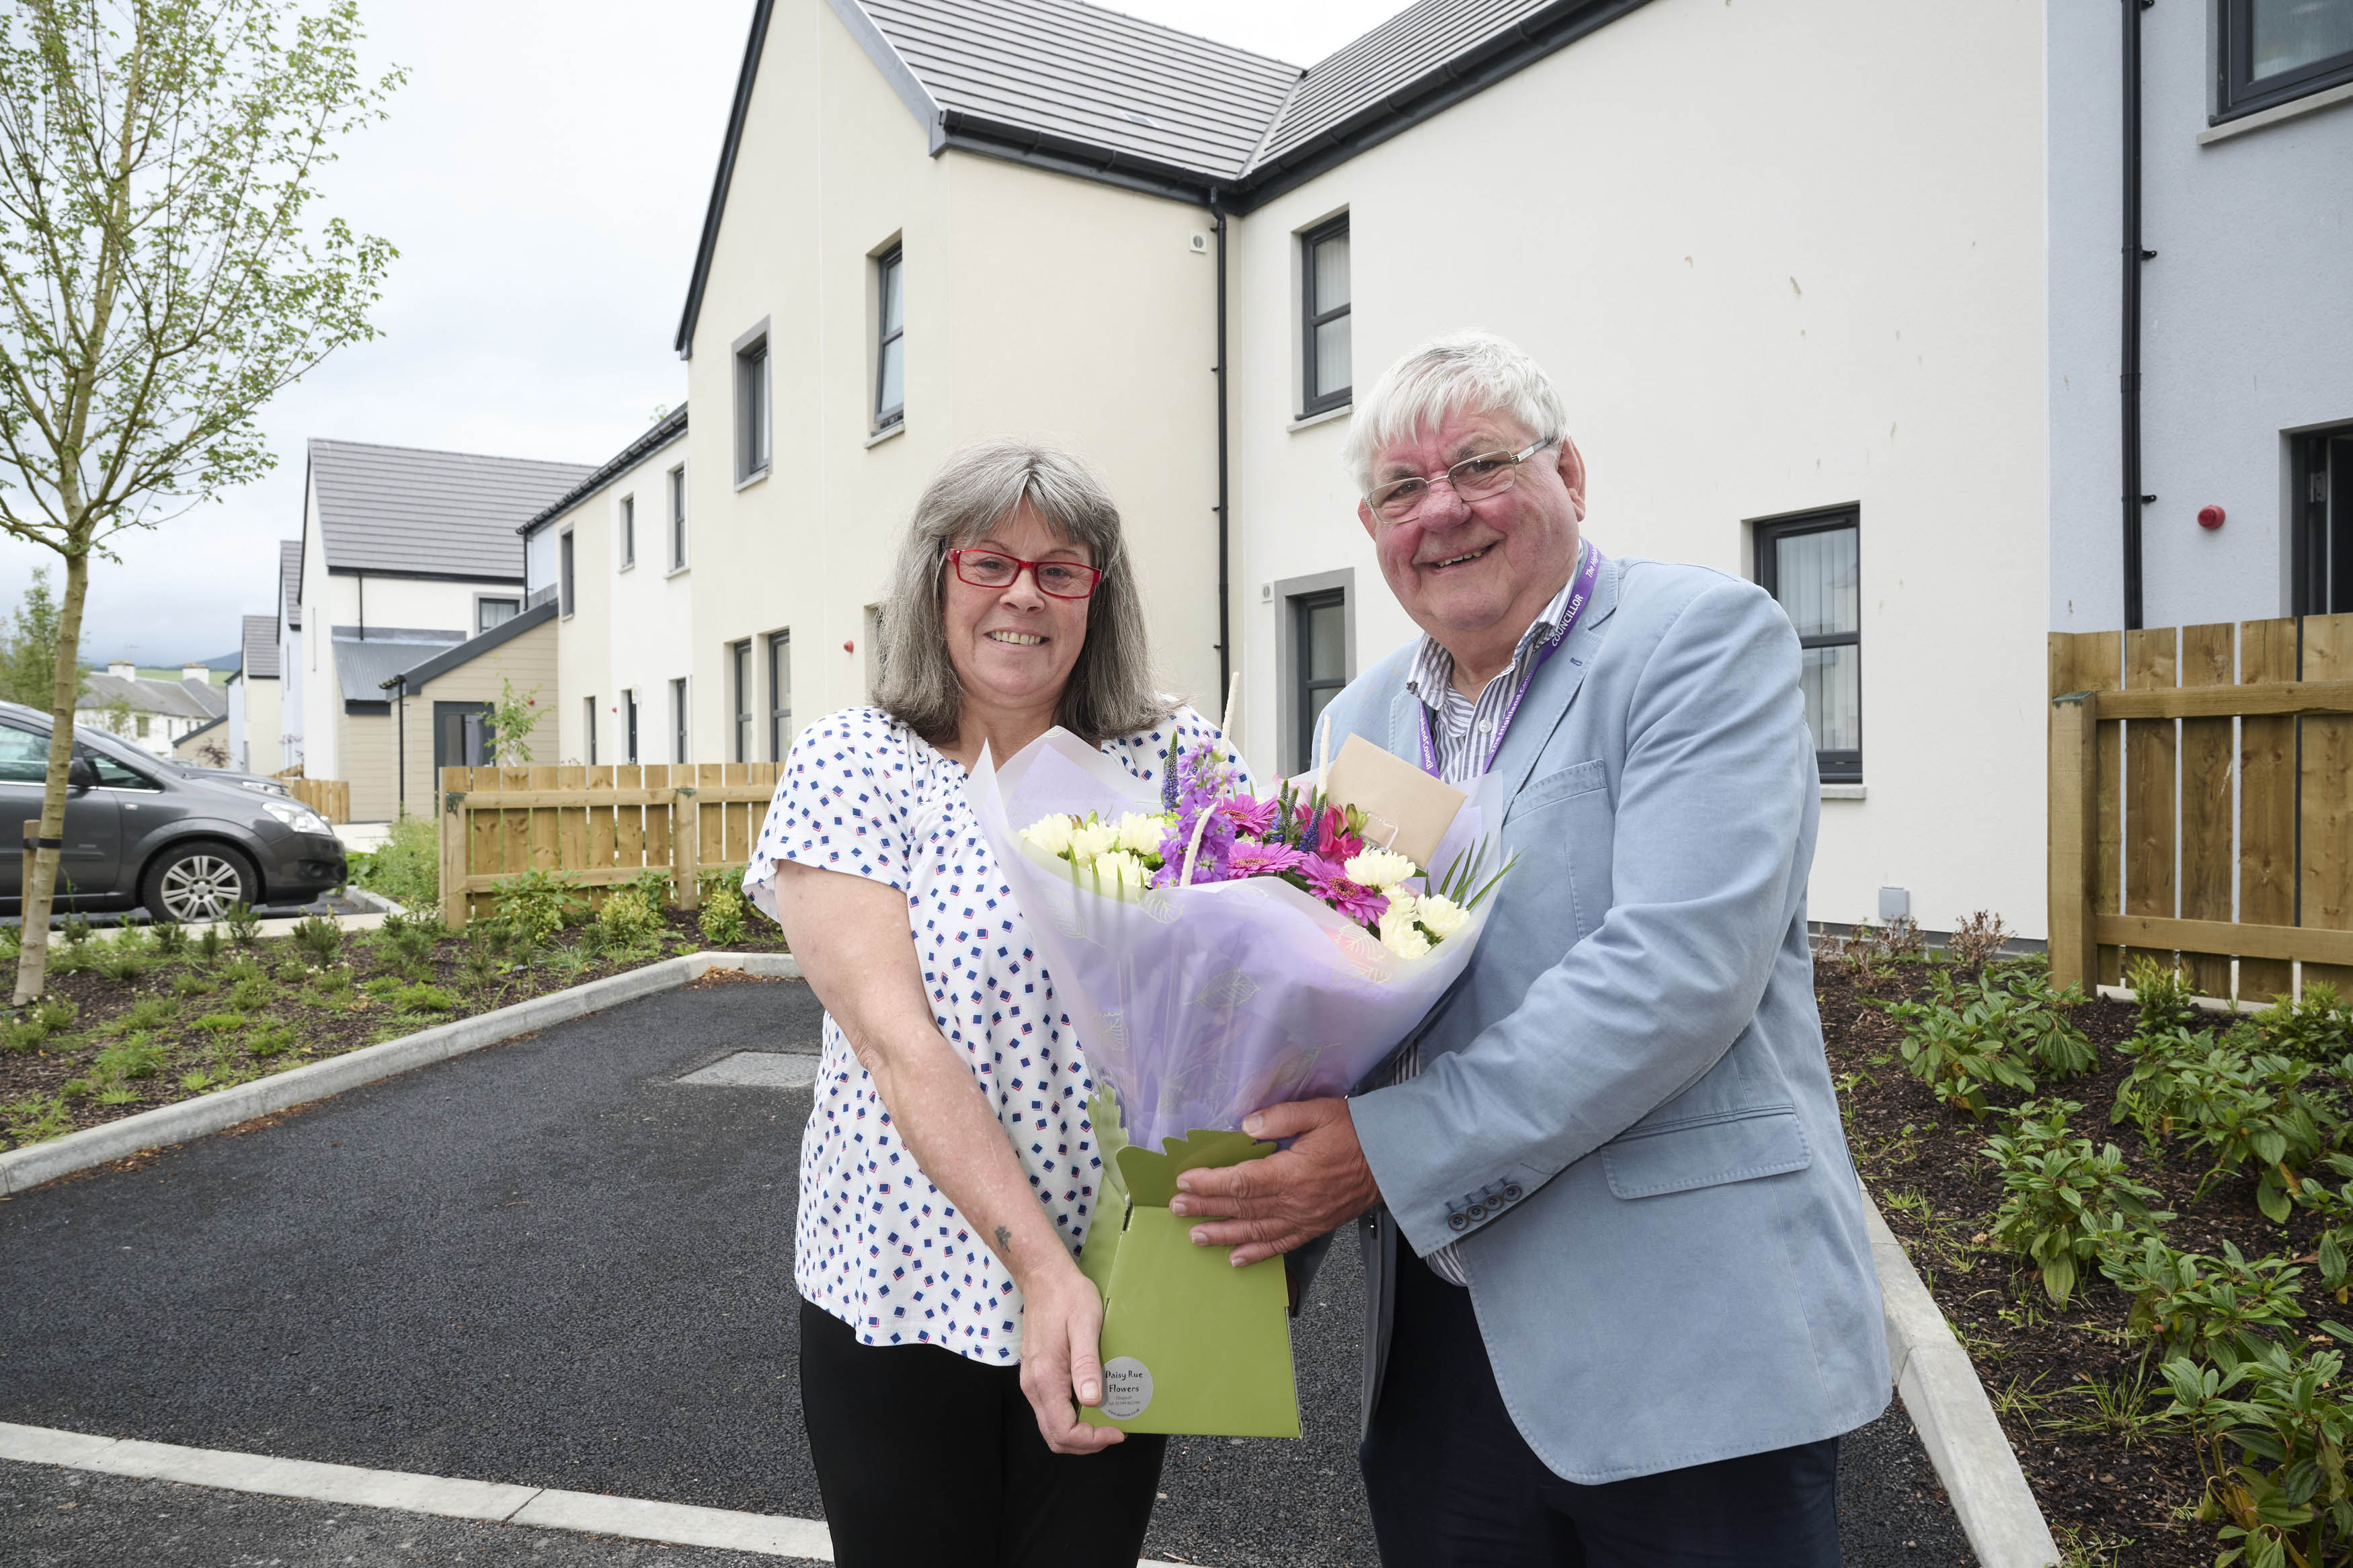 Housewarming visit for Dingwall council residents